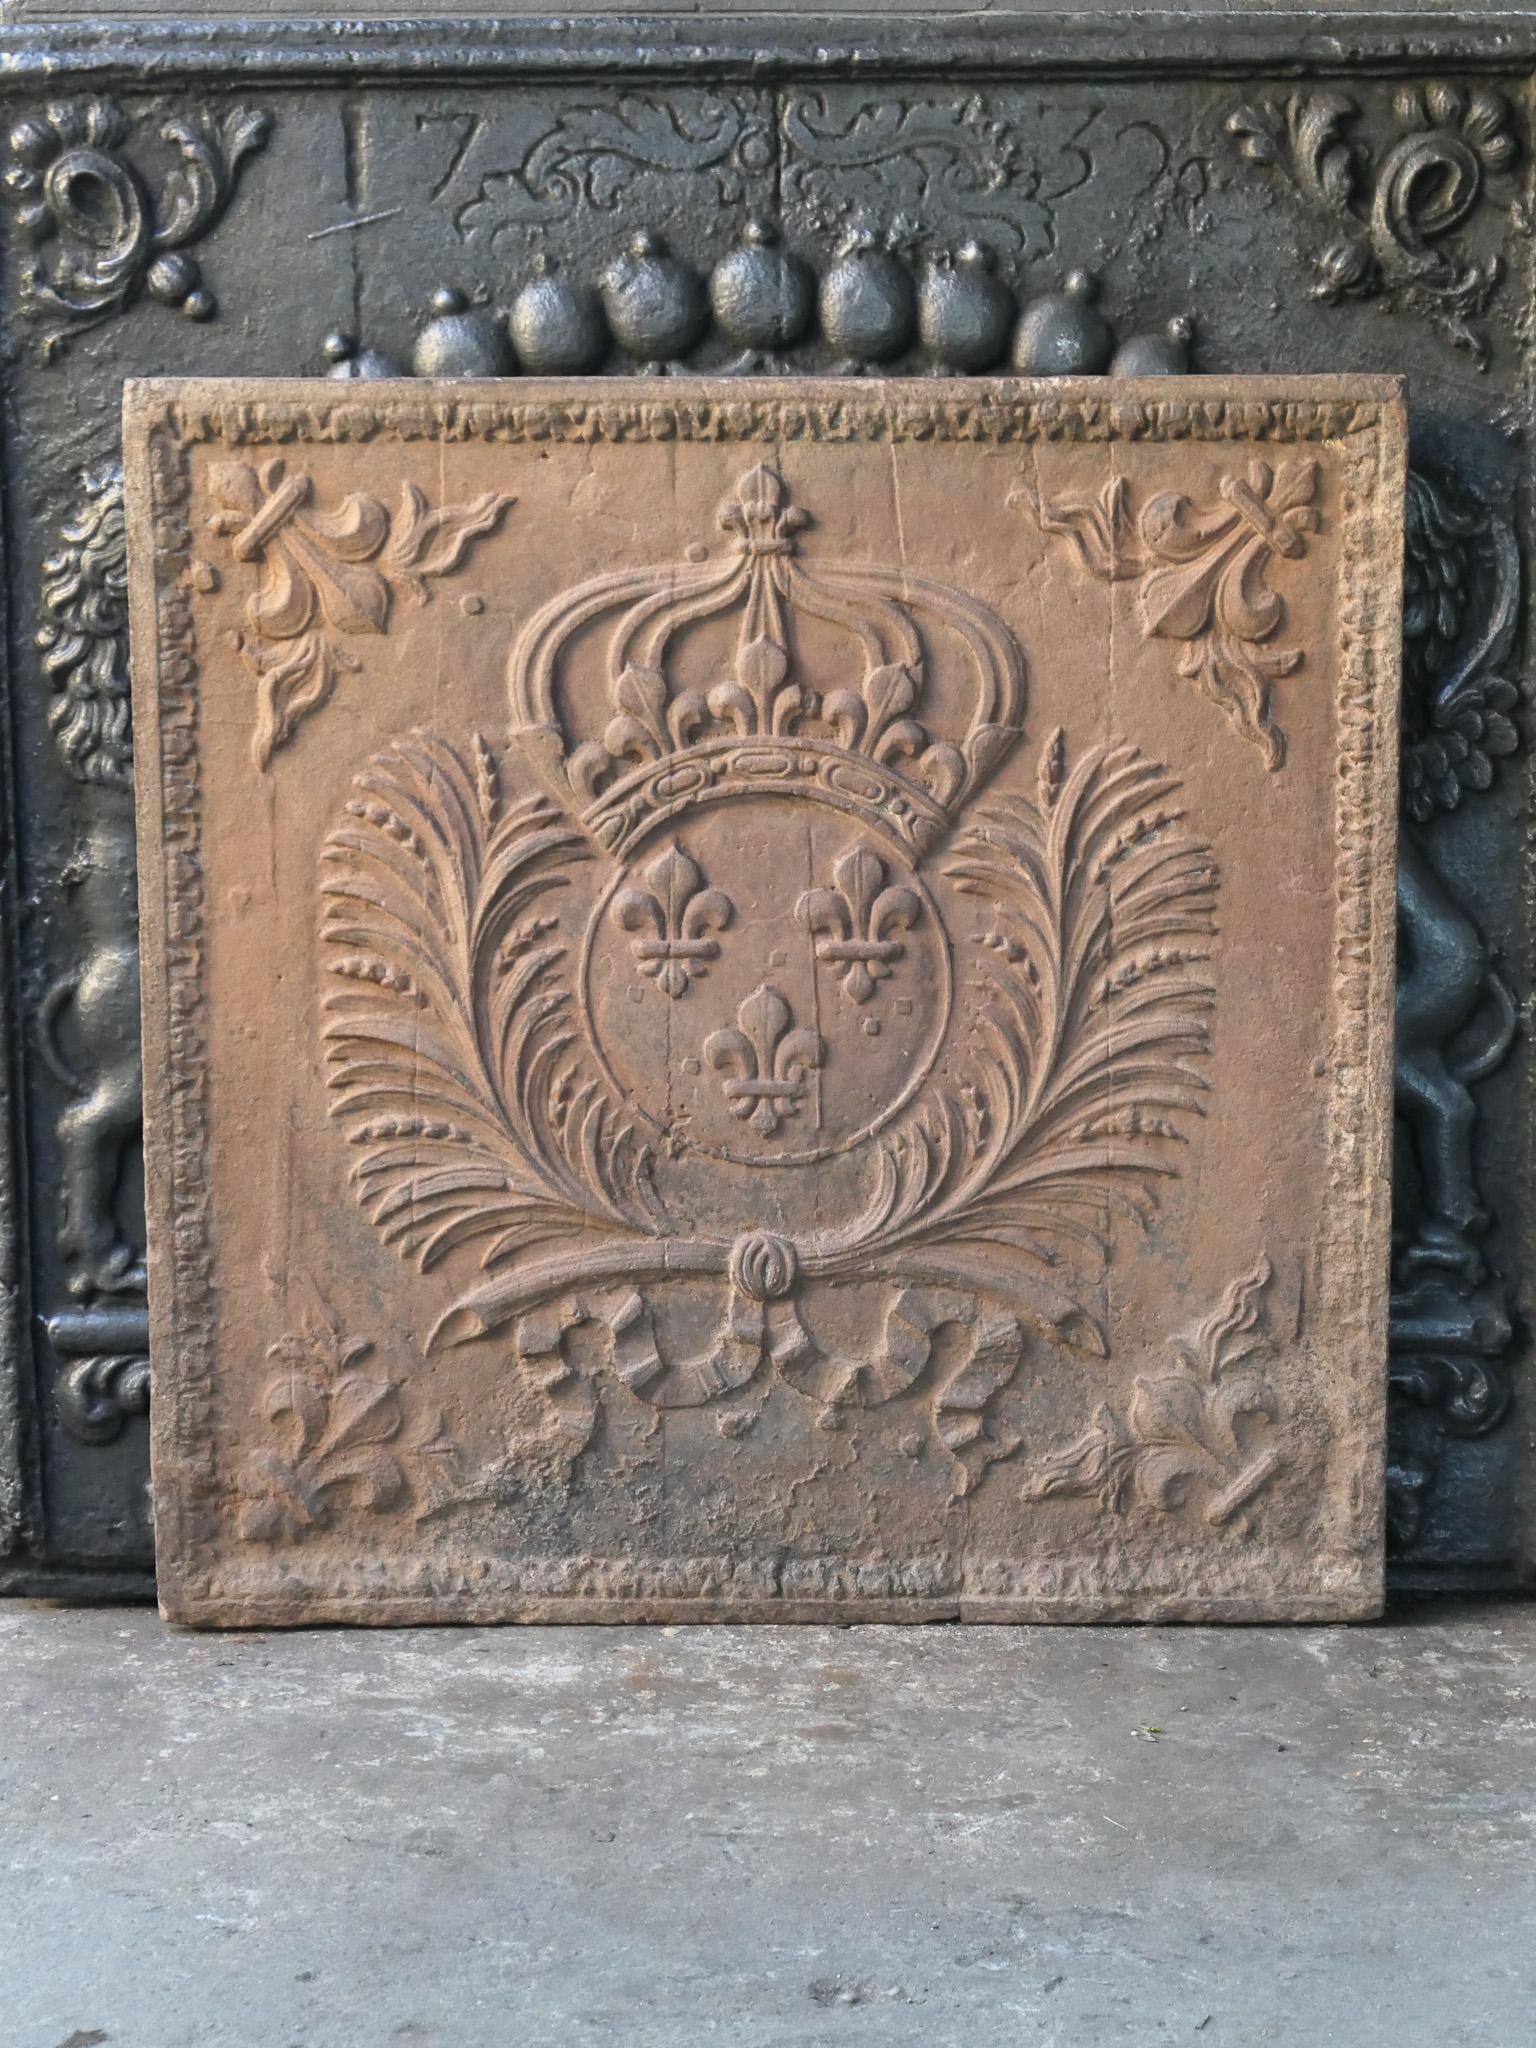 17th - 18th century French Louis XIV period fireback with the Arms of France, dated 1705. A coat of arms of the House of Bourbon, an originally French royal house that became a major dynasty in Europe. The house delivered kings for Spain (Navarra),